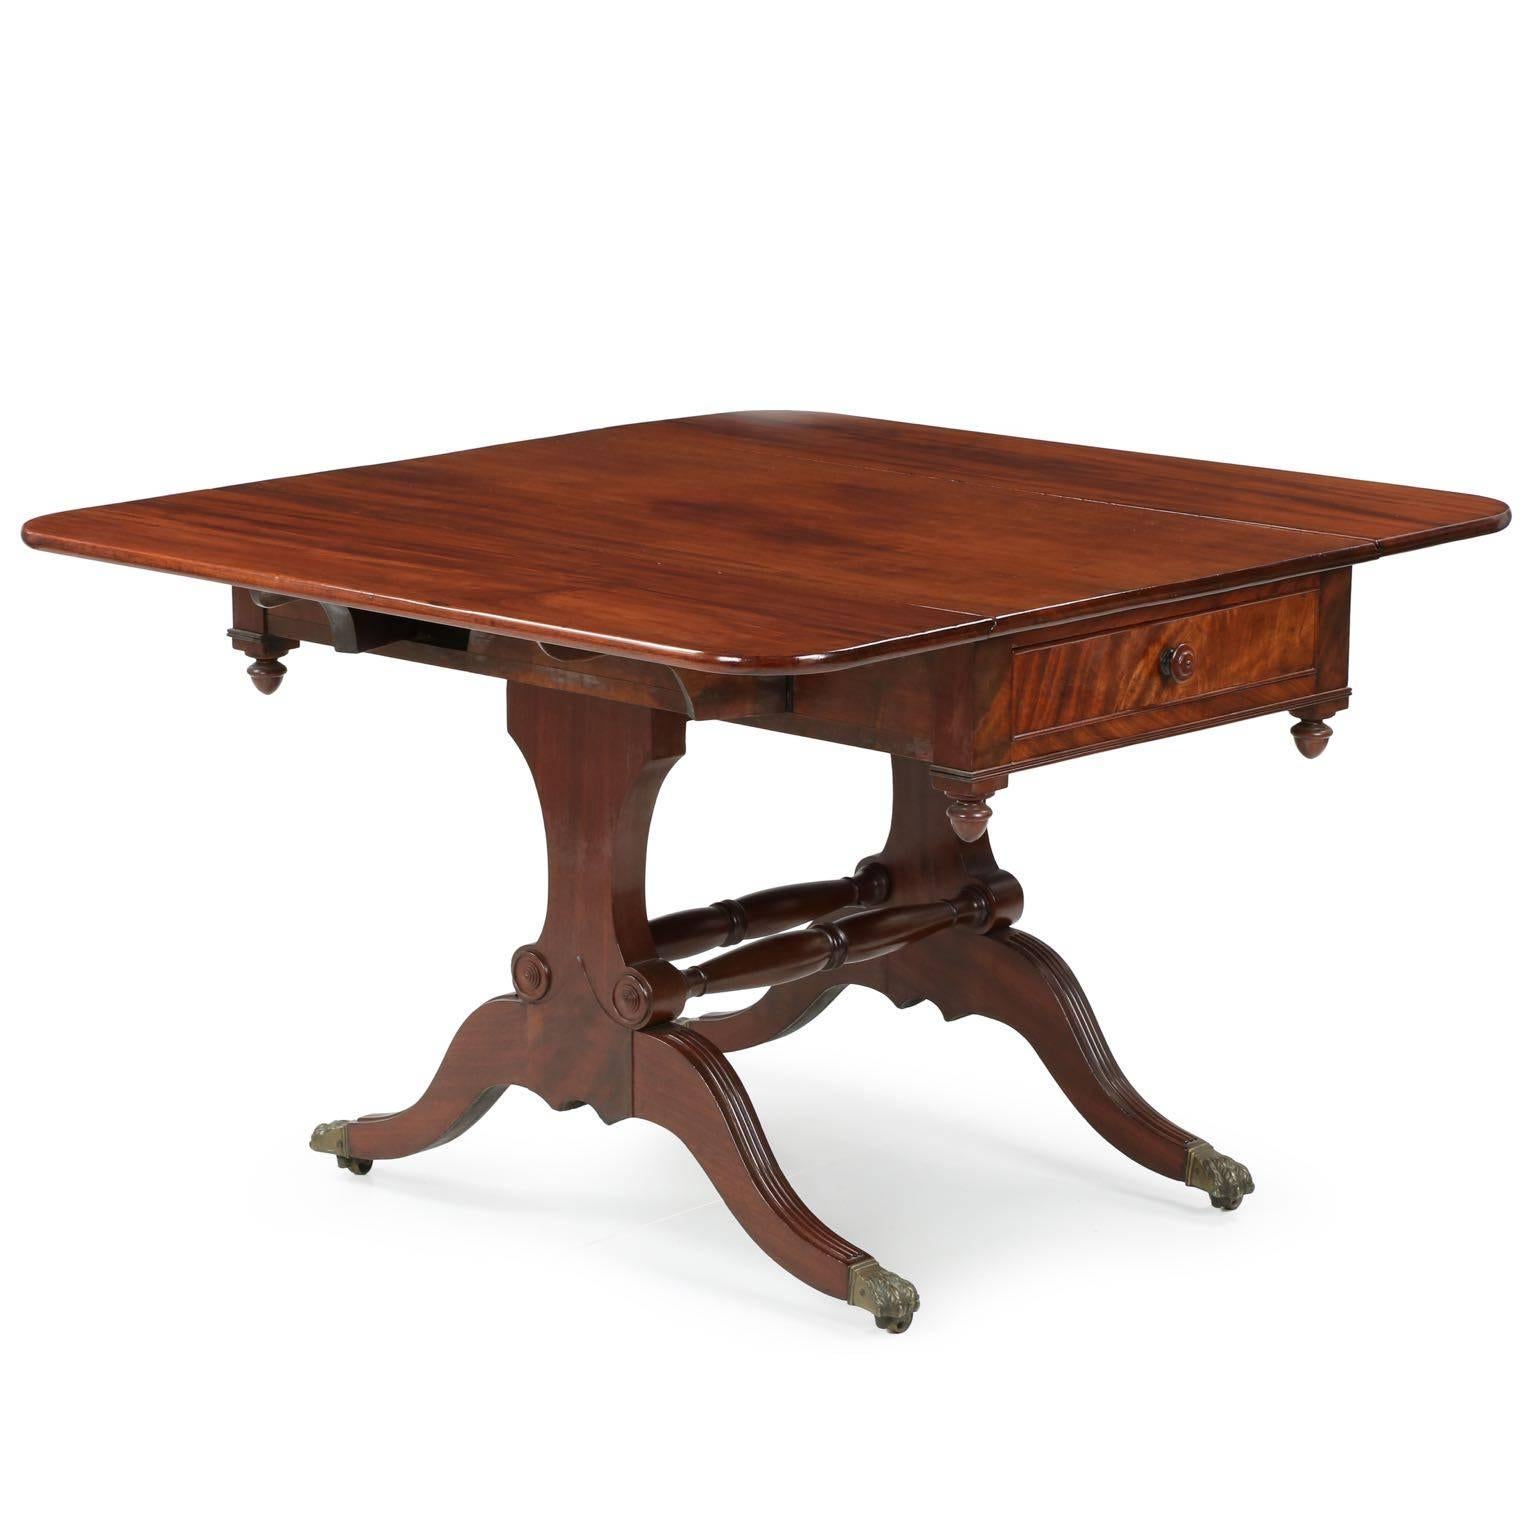 A simply gorgeous work with untouched structure and originality other than an early surface refinishing, this fine American Classical breakfast table is a statement of lasting quality and richness of surface. The vibrant mahogany grains of the top